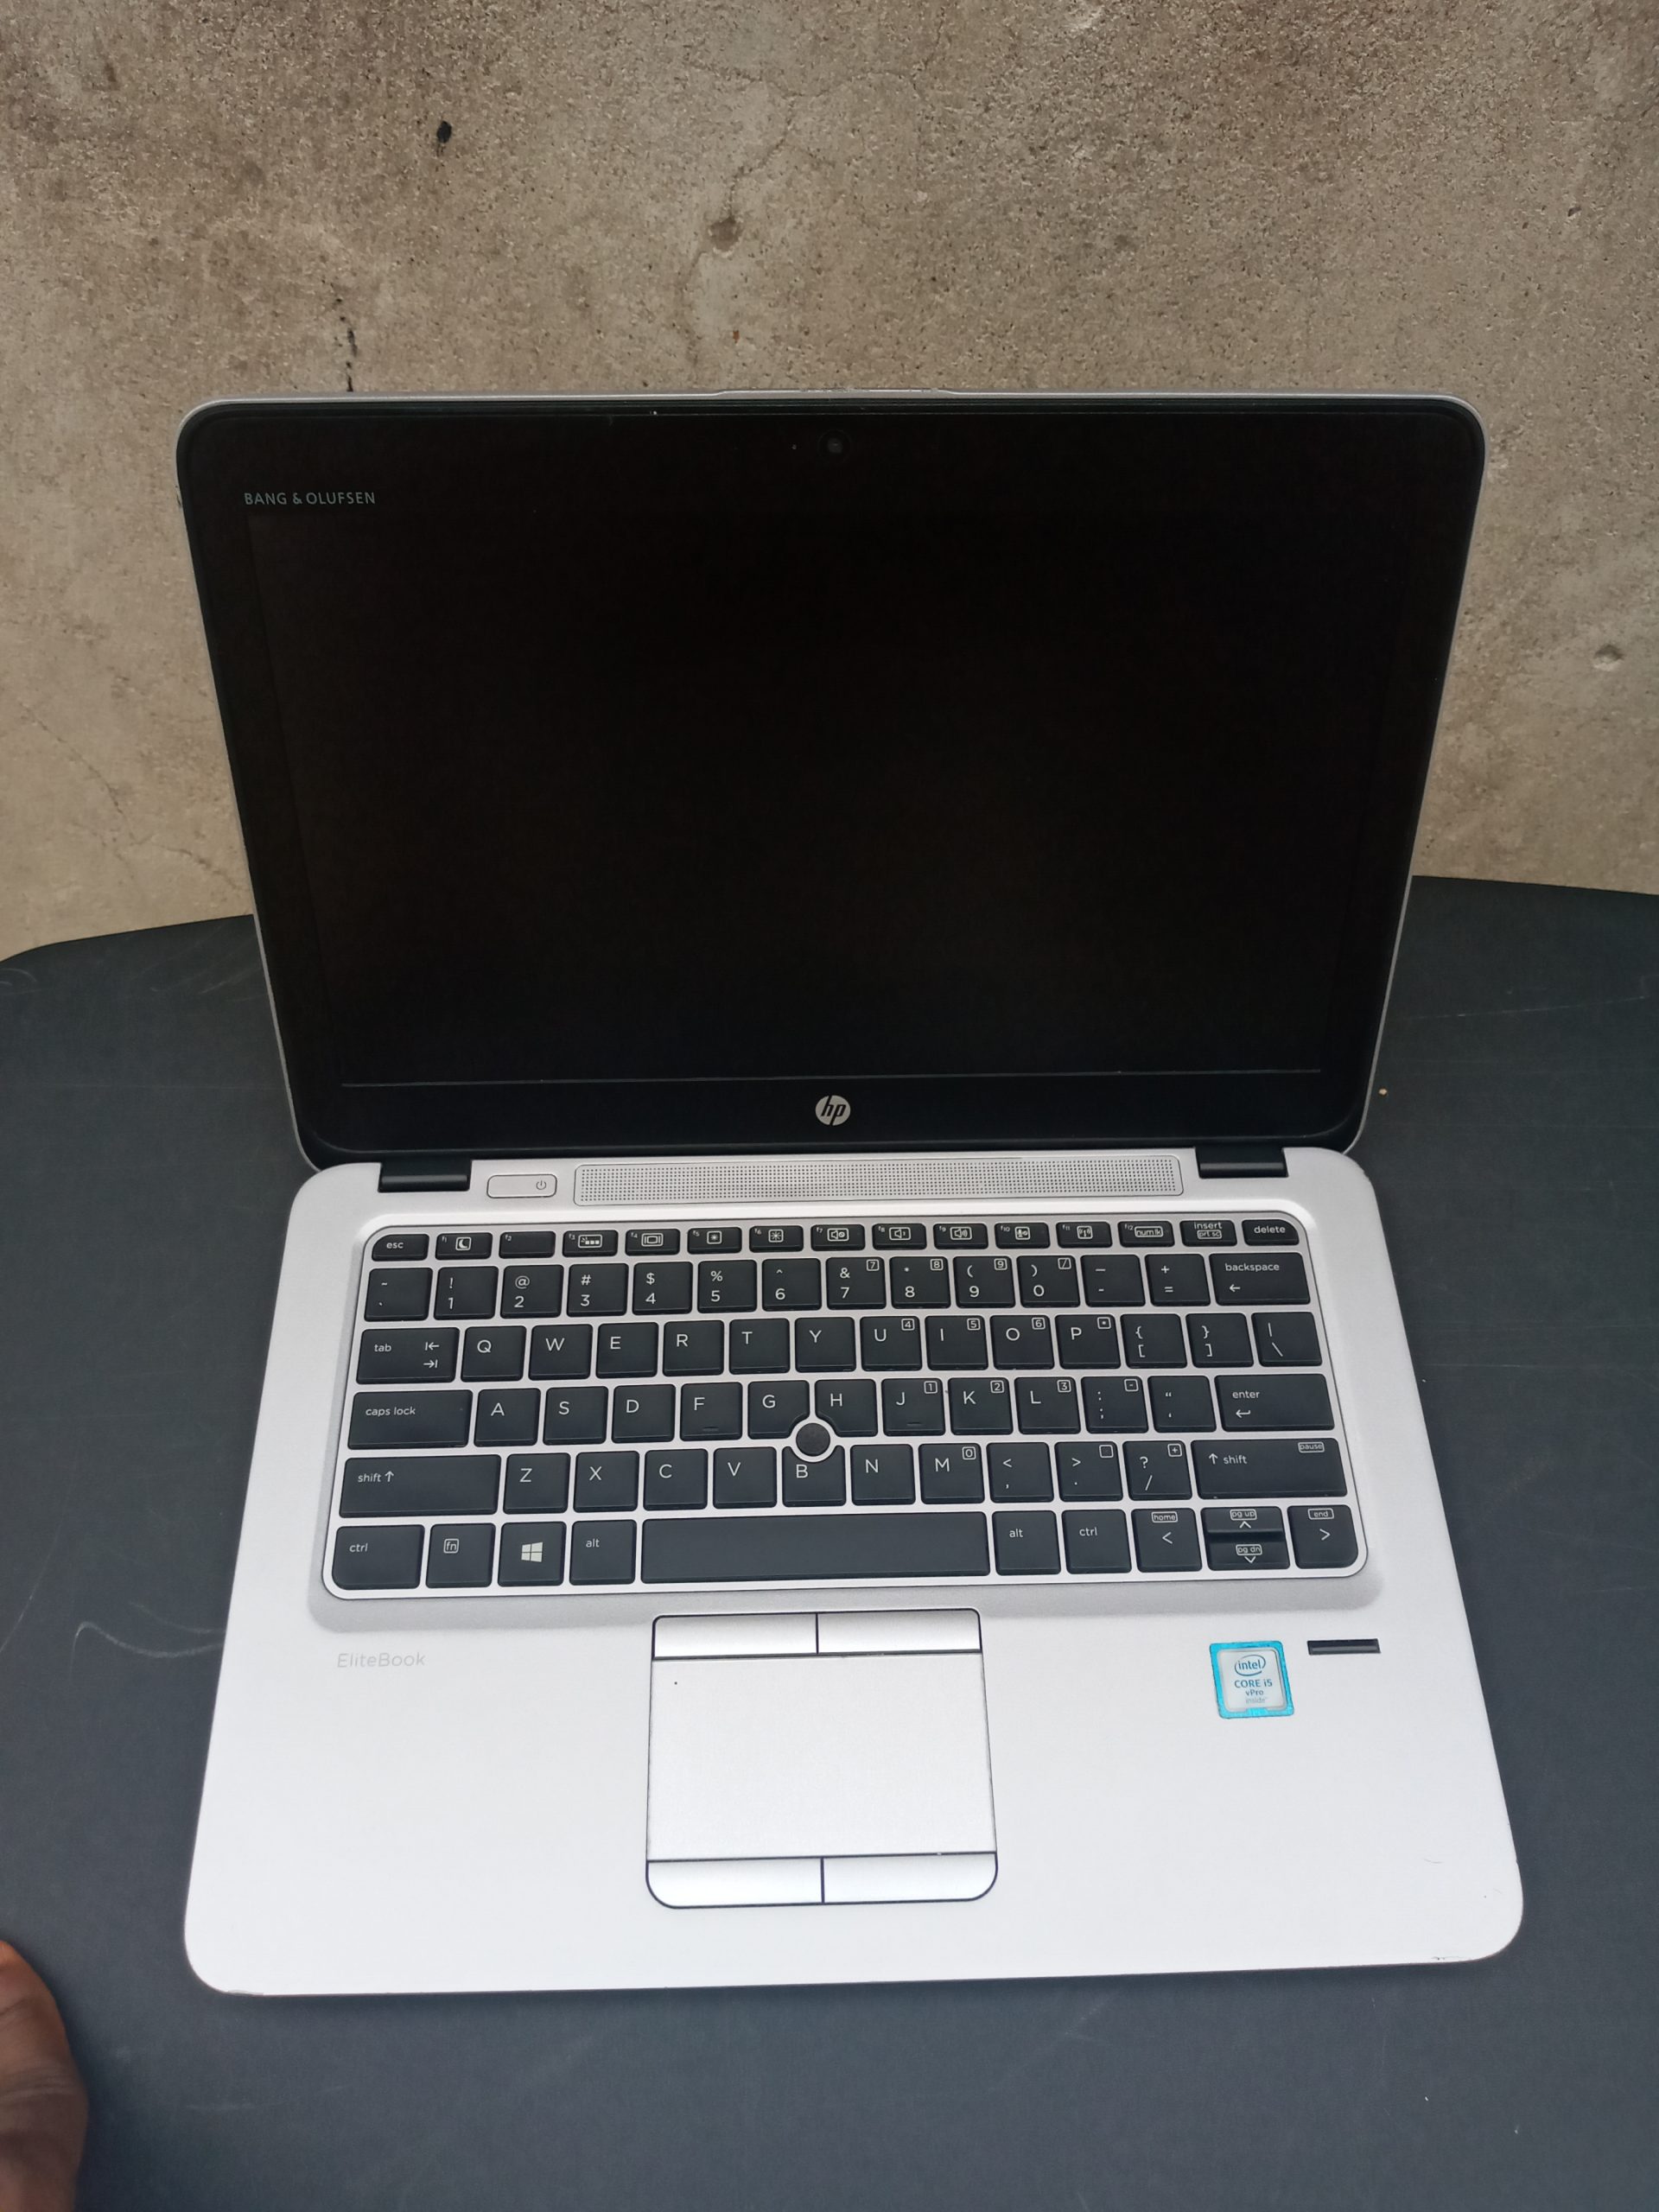 hp elite book 820 g3 six generation for sale in lagos nigeria, uk used laptops for sale , laptop for sale, latest price for used laptops in lagos nigeria, price for used hp 820 g3 in lagos , affordable HP 820 g3 FOR SALE in lagos, laptop whole sale shop in lagos , whole sale laptop warehouse in lagos, laptop warehouse in ikeja computer village, laptop ware house in nigeria laptop ware house for hp elte book 820 g3,